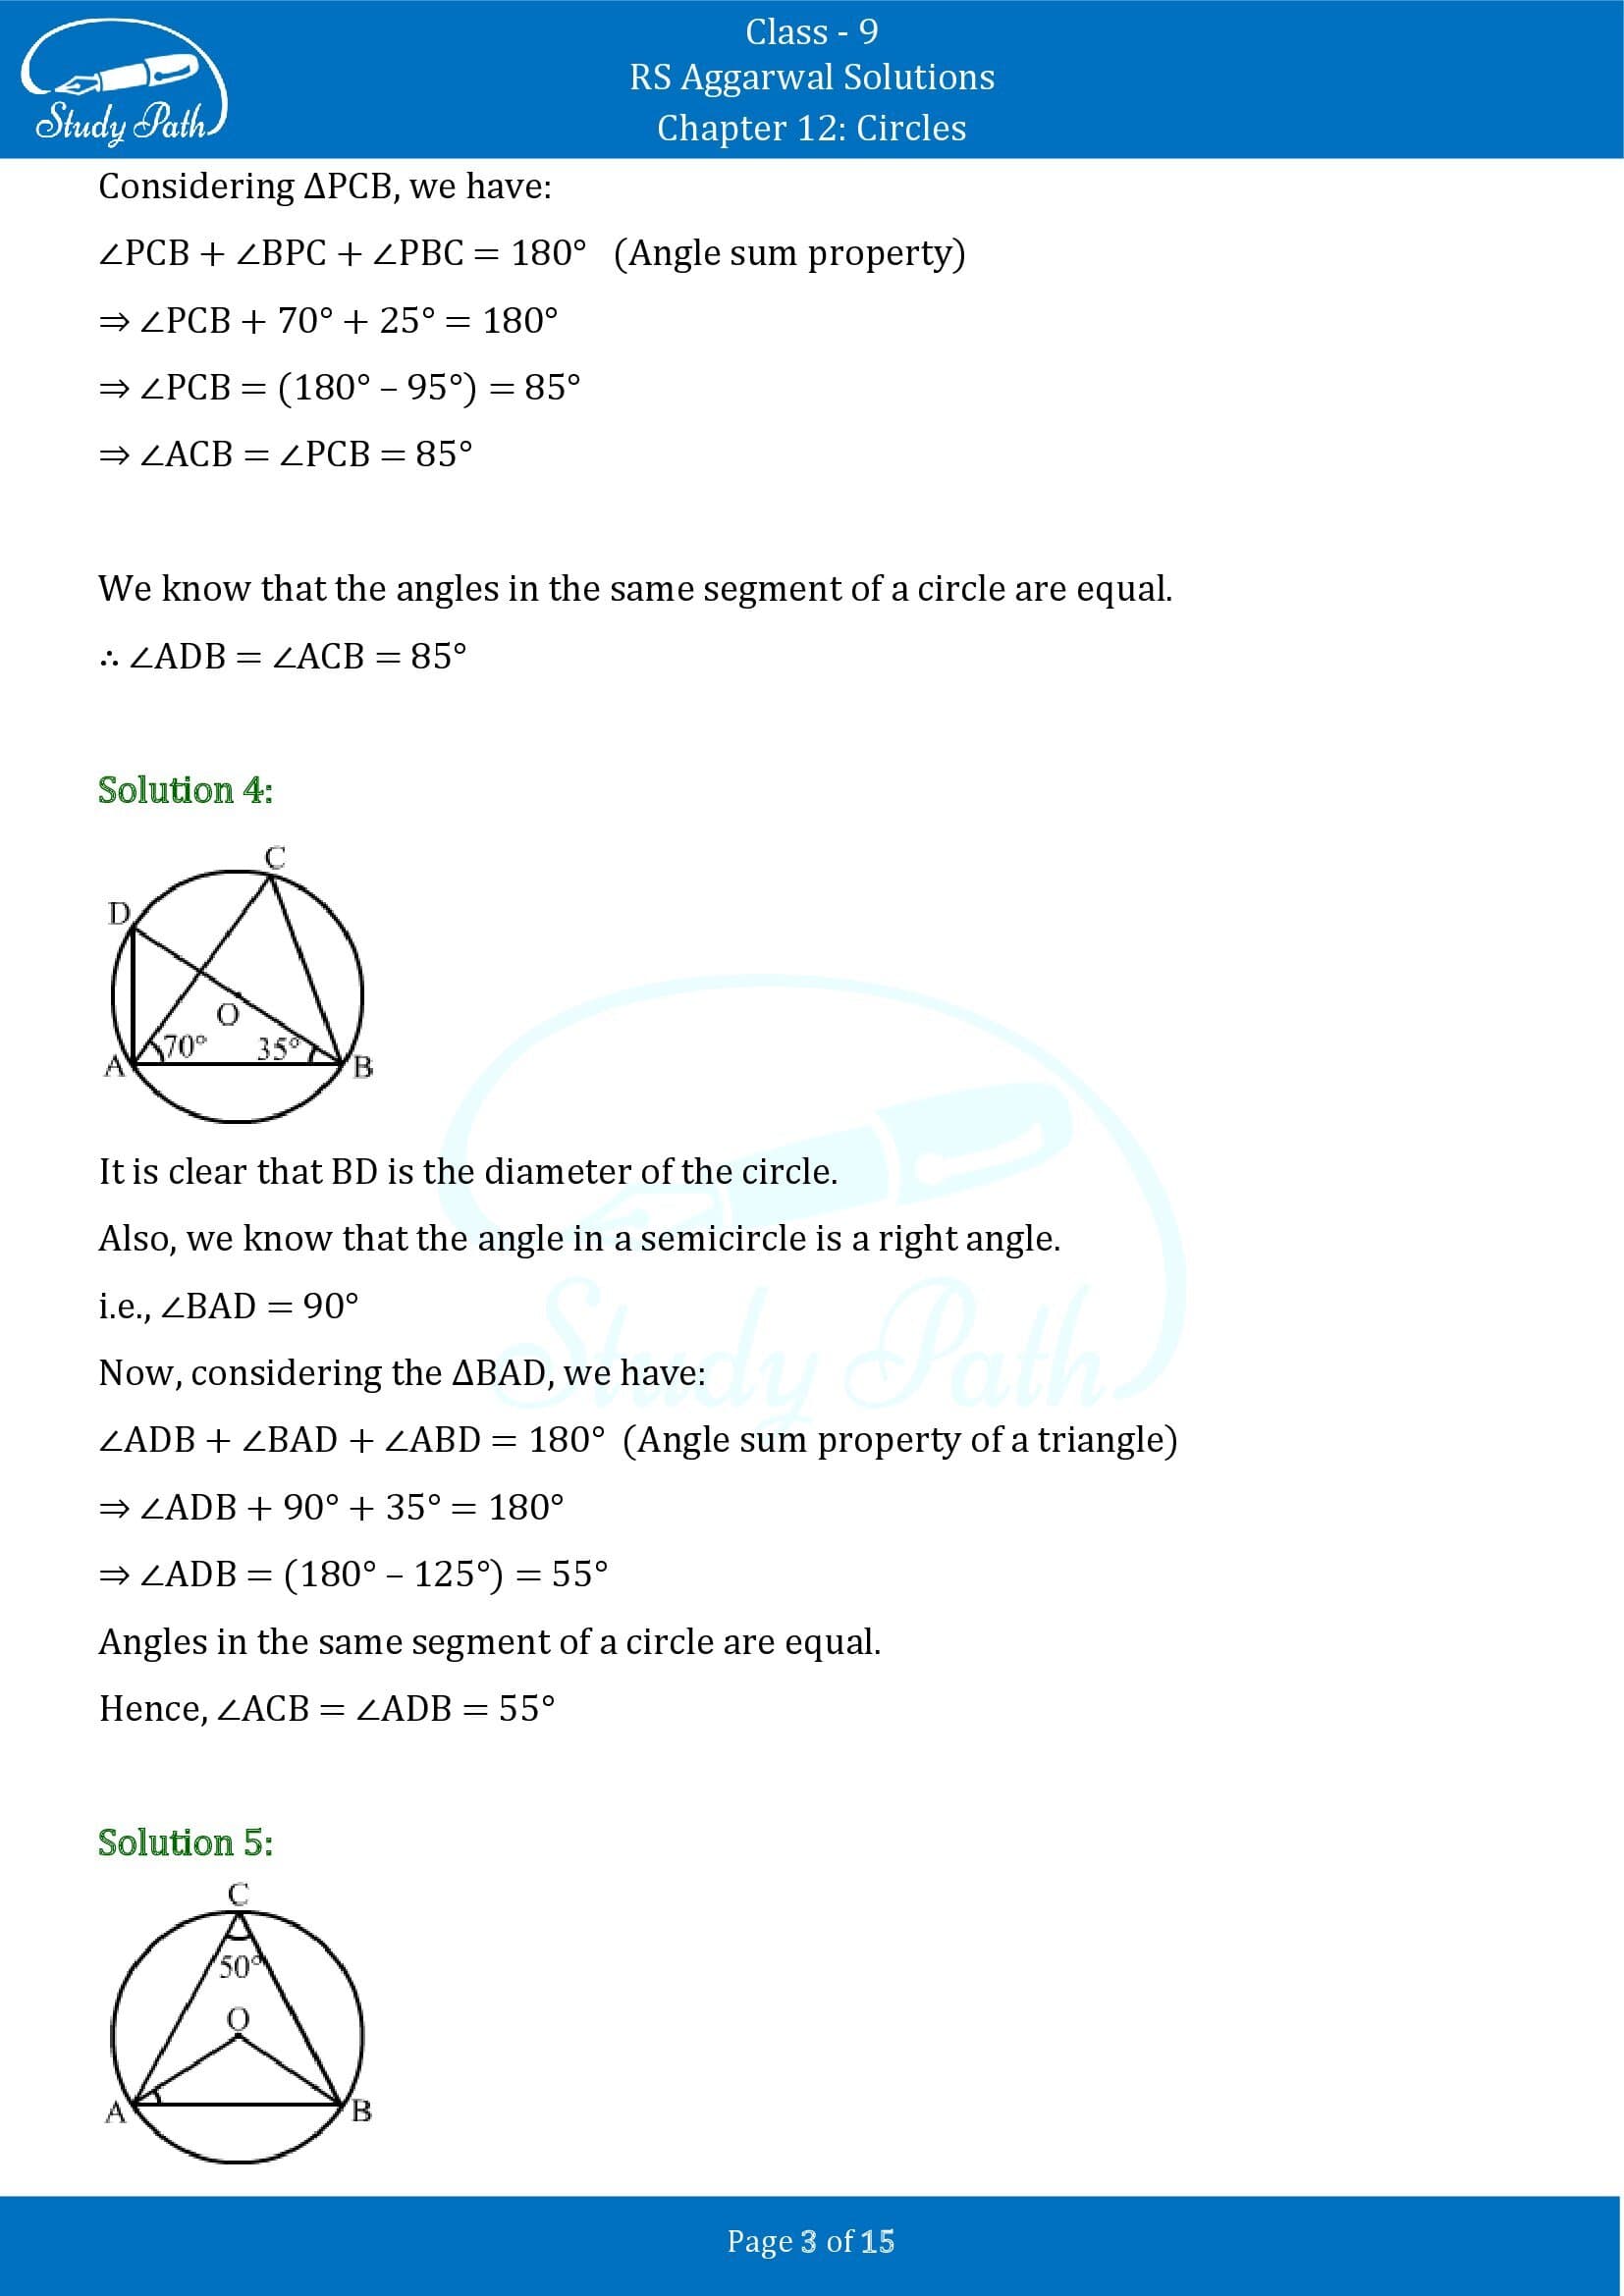 RS Aggarwal Solutions Class 9 Chapter 12 Circles Exercise 12B 00003